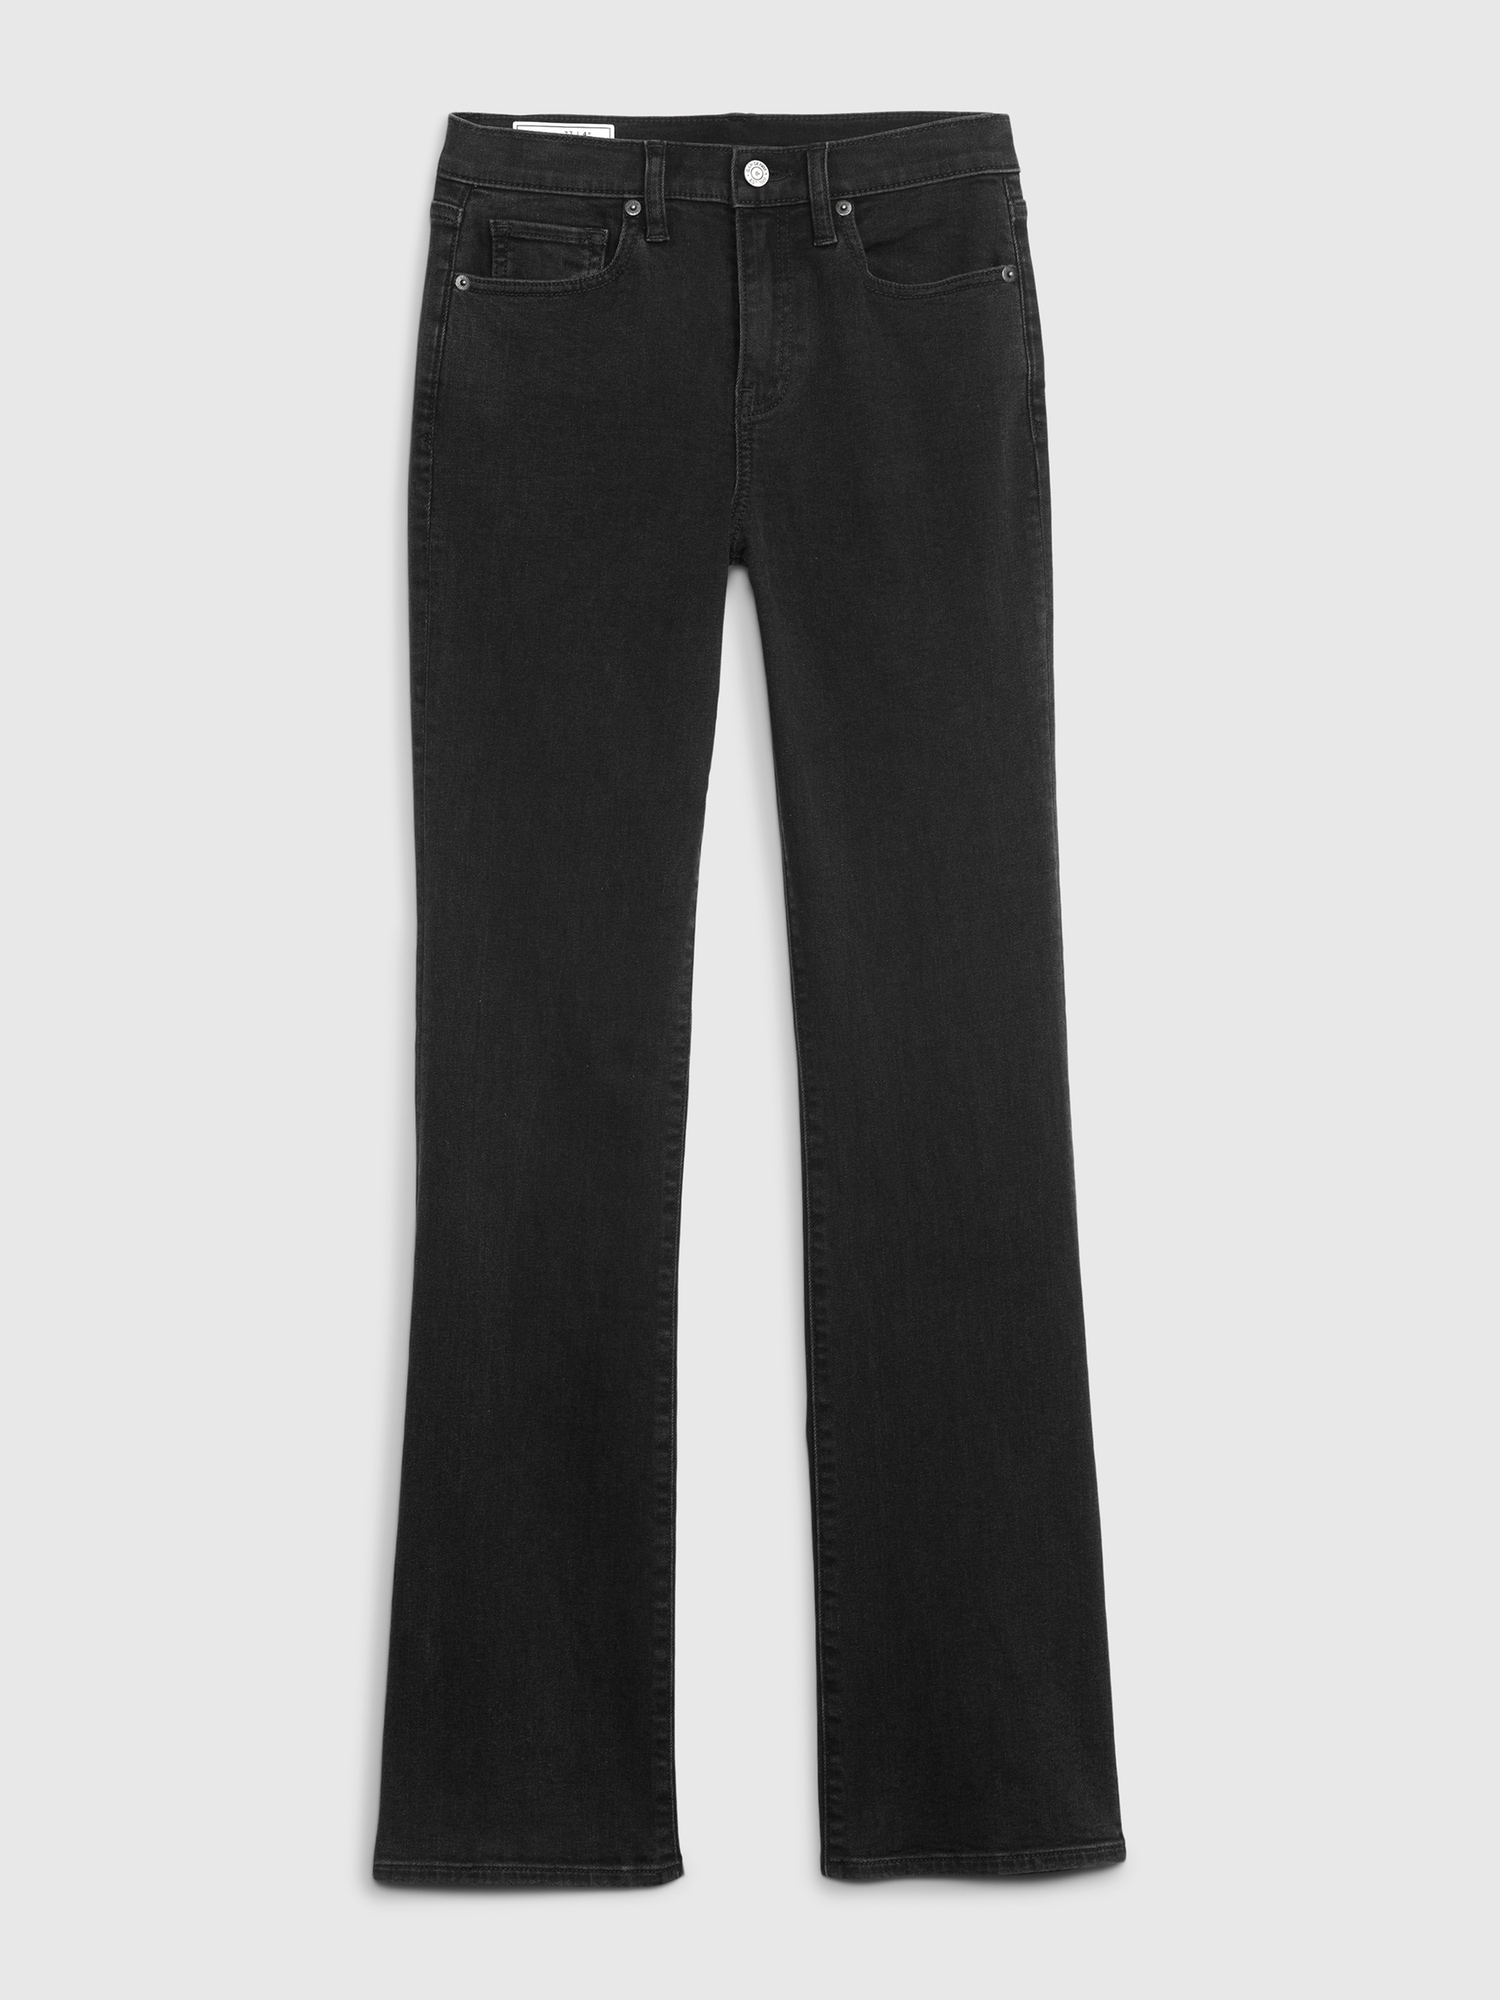 Women's Pull-On Stretch Bootcut Denim Jean Mini Flare Pants Black Small at   Women's Jeans store